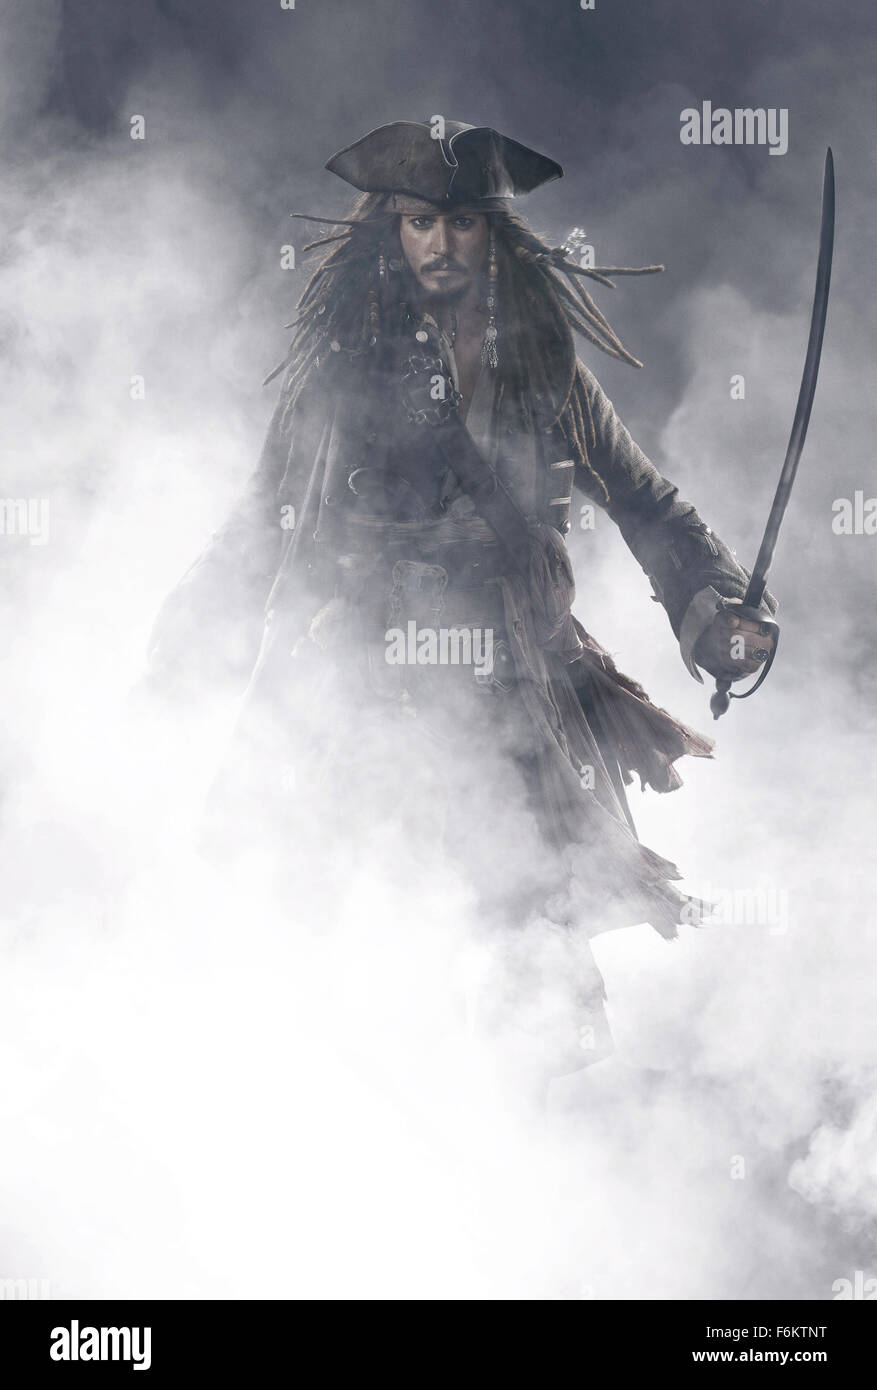 RELEASE DATE: May 25, 2007. STUDIO: Jerry Bruckheimer Films/Walt Disney Pictures. PLOT: Captain Barbossa, Will Turner and Elizabeth Swann must sail off the edge of the map, navigate treachery and betrayal, and make their final alliances for one last decisive battle. PICTURED: Composite art for the movie poster featuring JOHNNY DEPP as Captain Jack Sparrow. Stock Photo